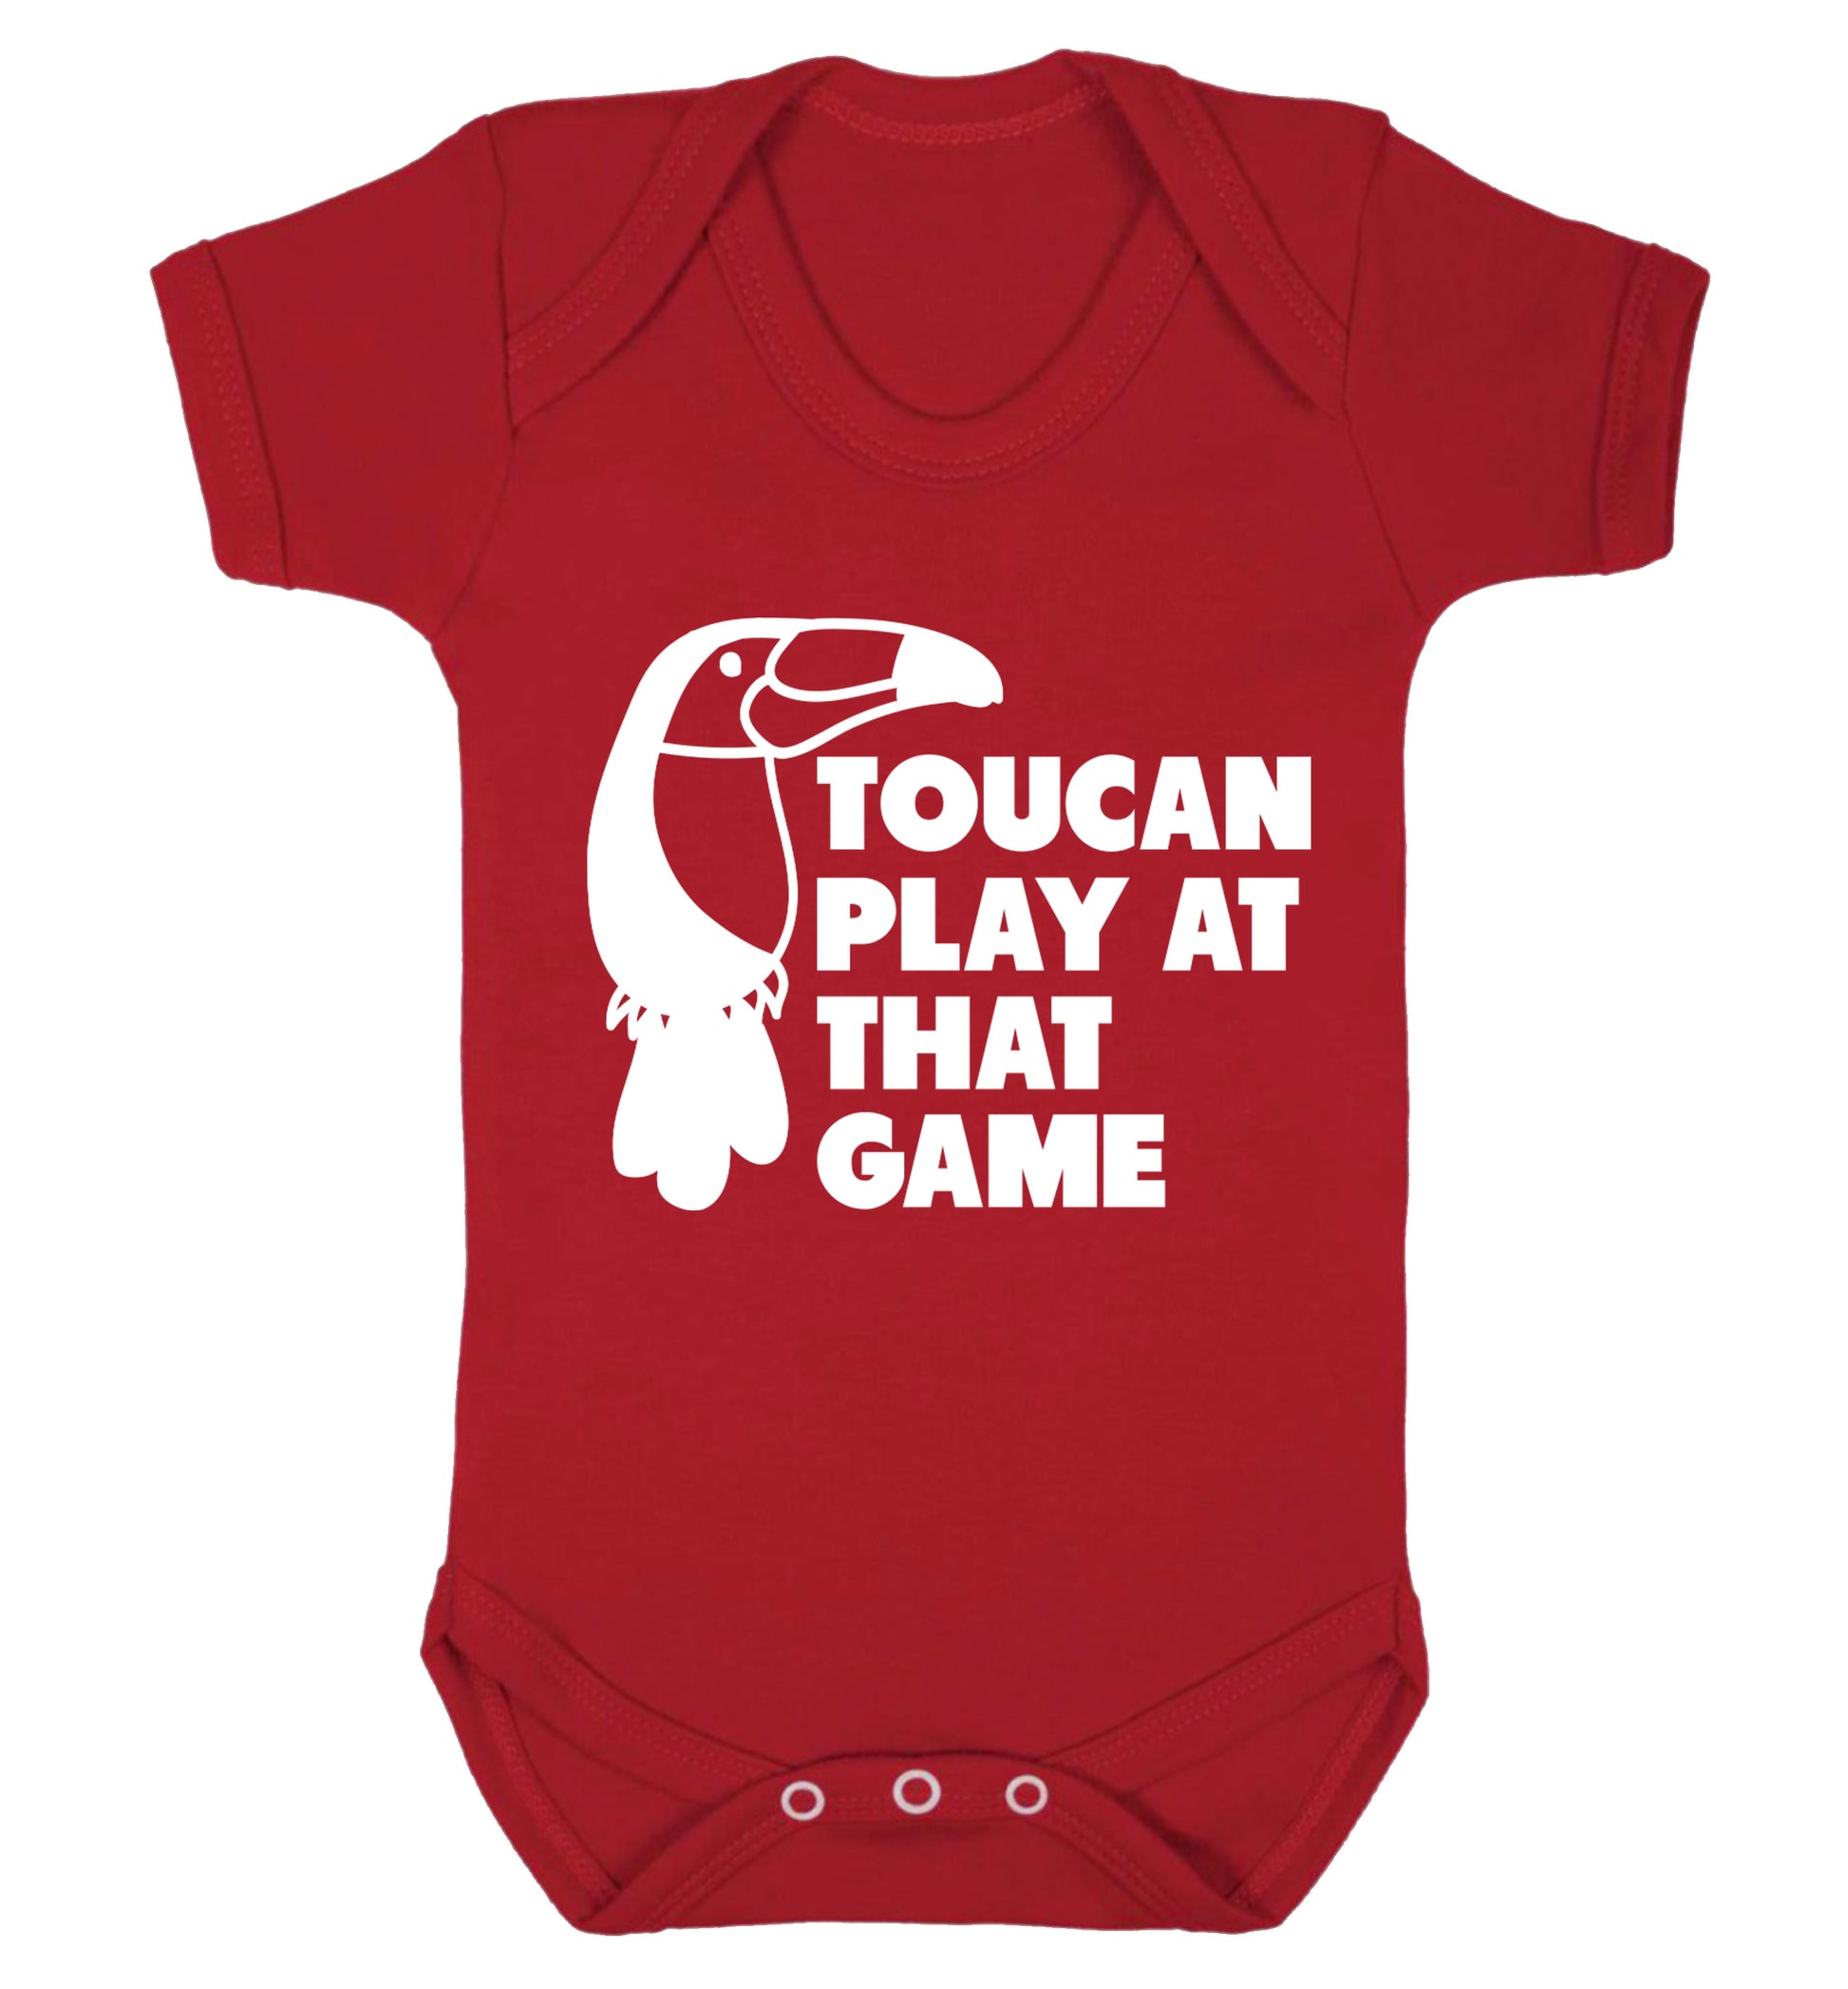 Toucan play at that game Baby Vest red 18-24 months